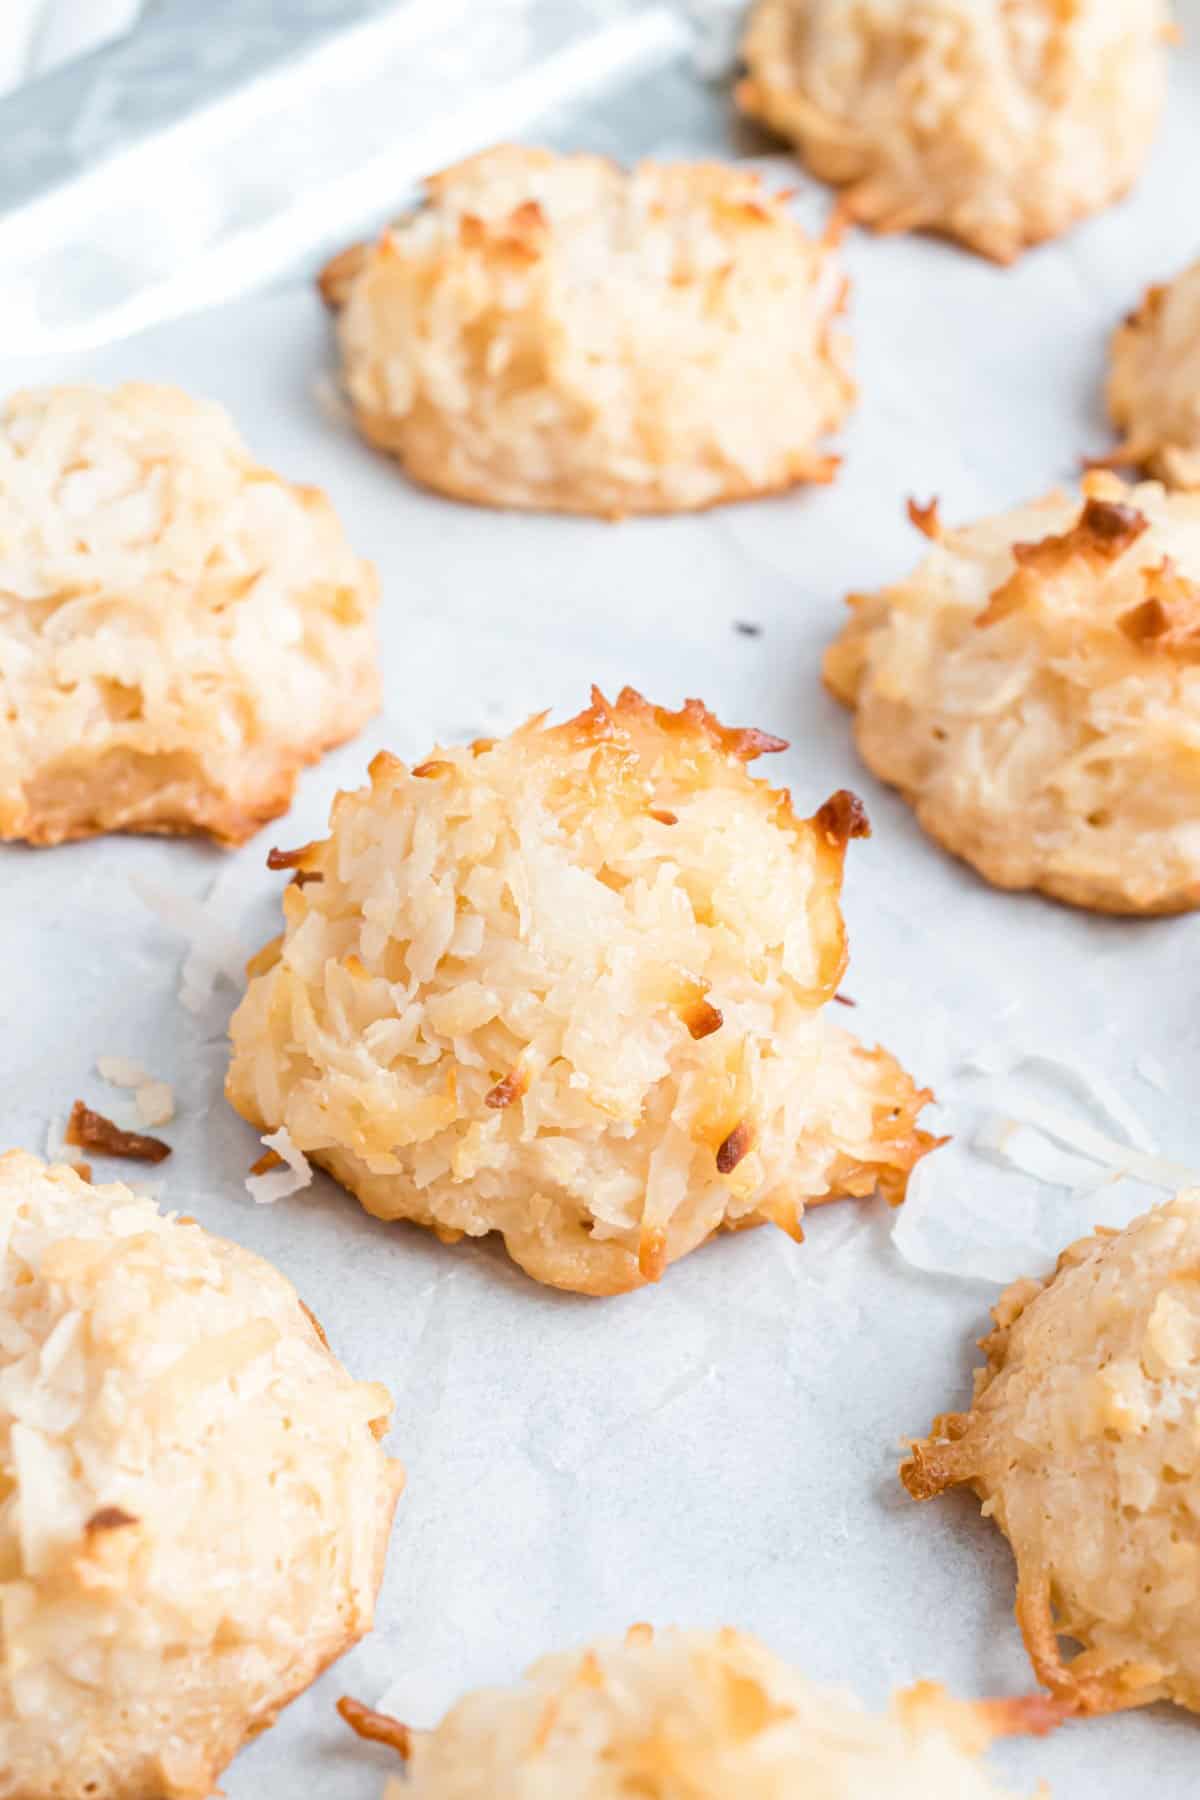 Coconut macaroons baked on a parchment paper lined cookie sheet.